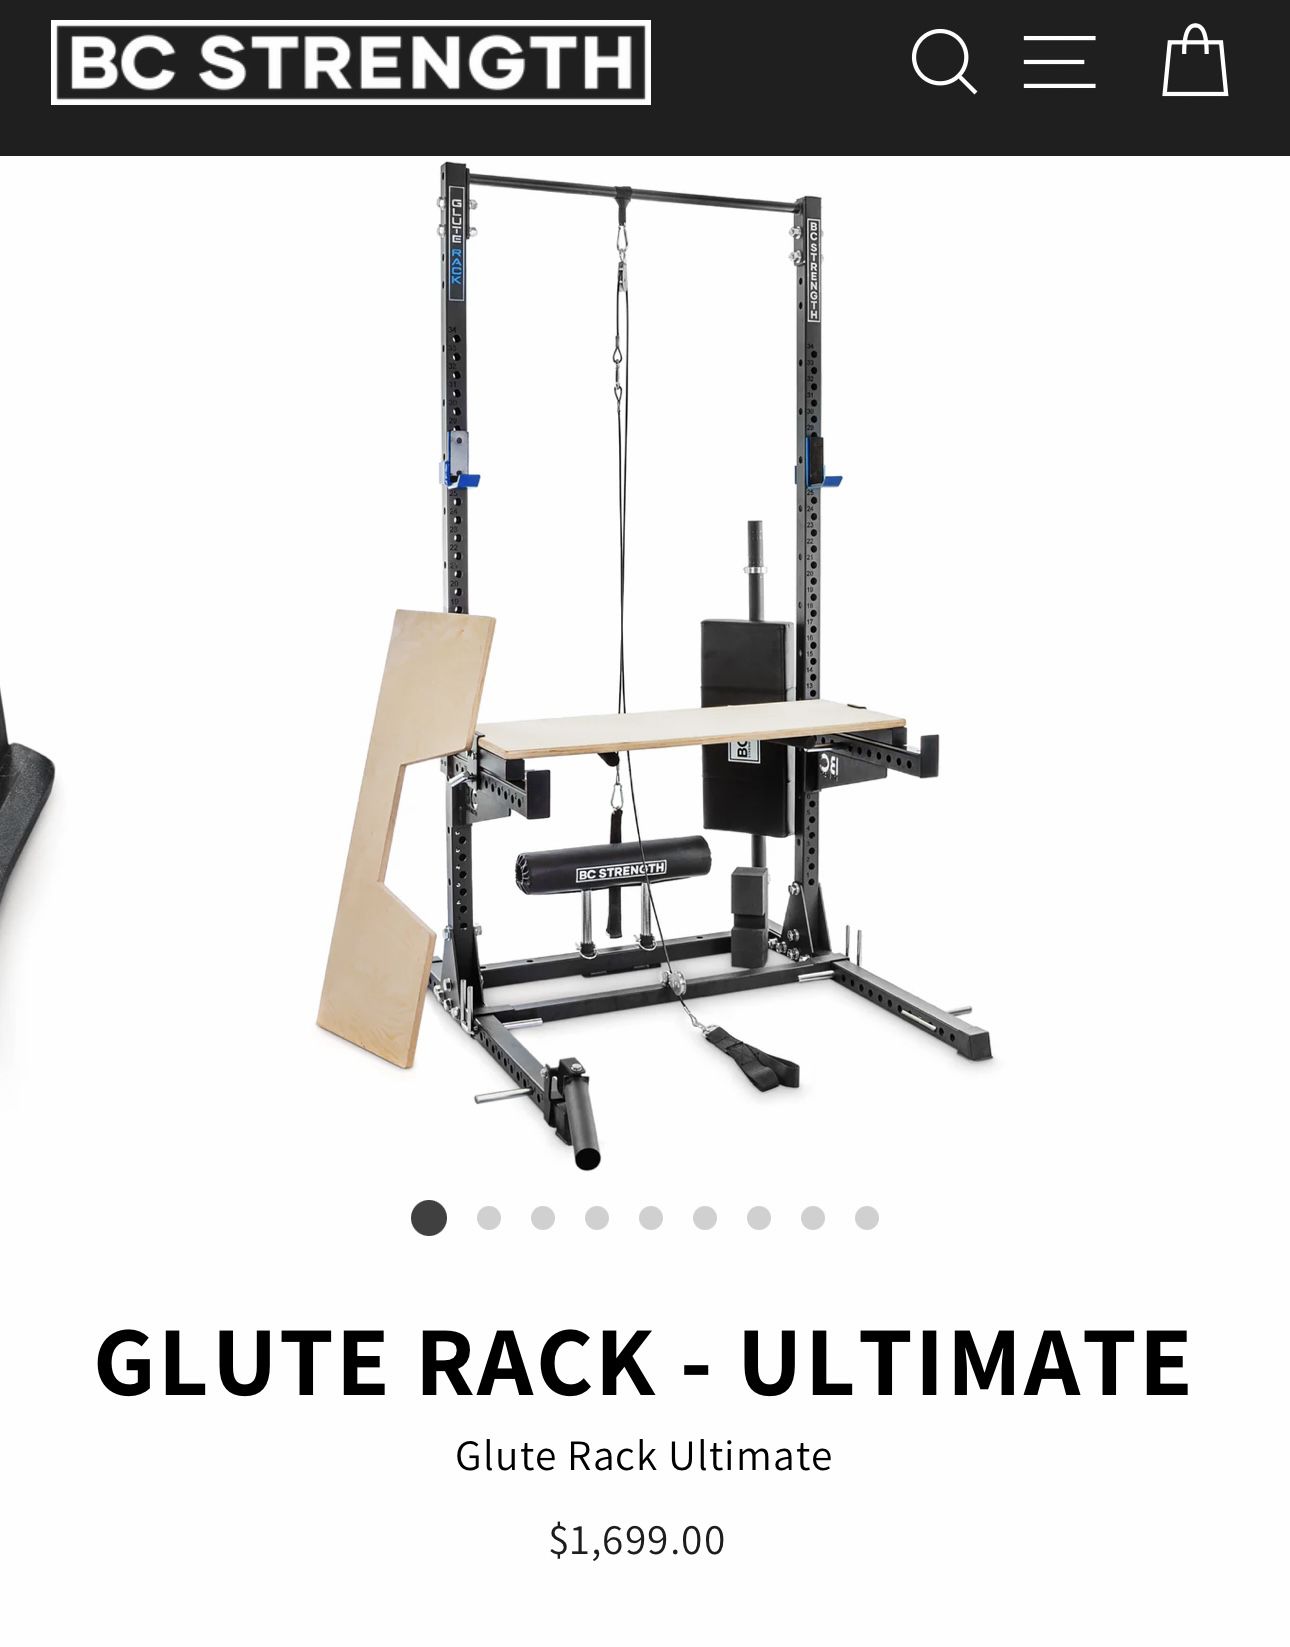 Weights Weight Plate BC STRENGTH GLUTE RACK ULTIMATE & MORE